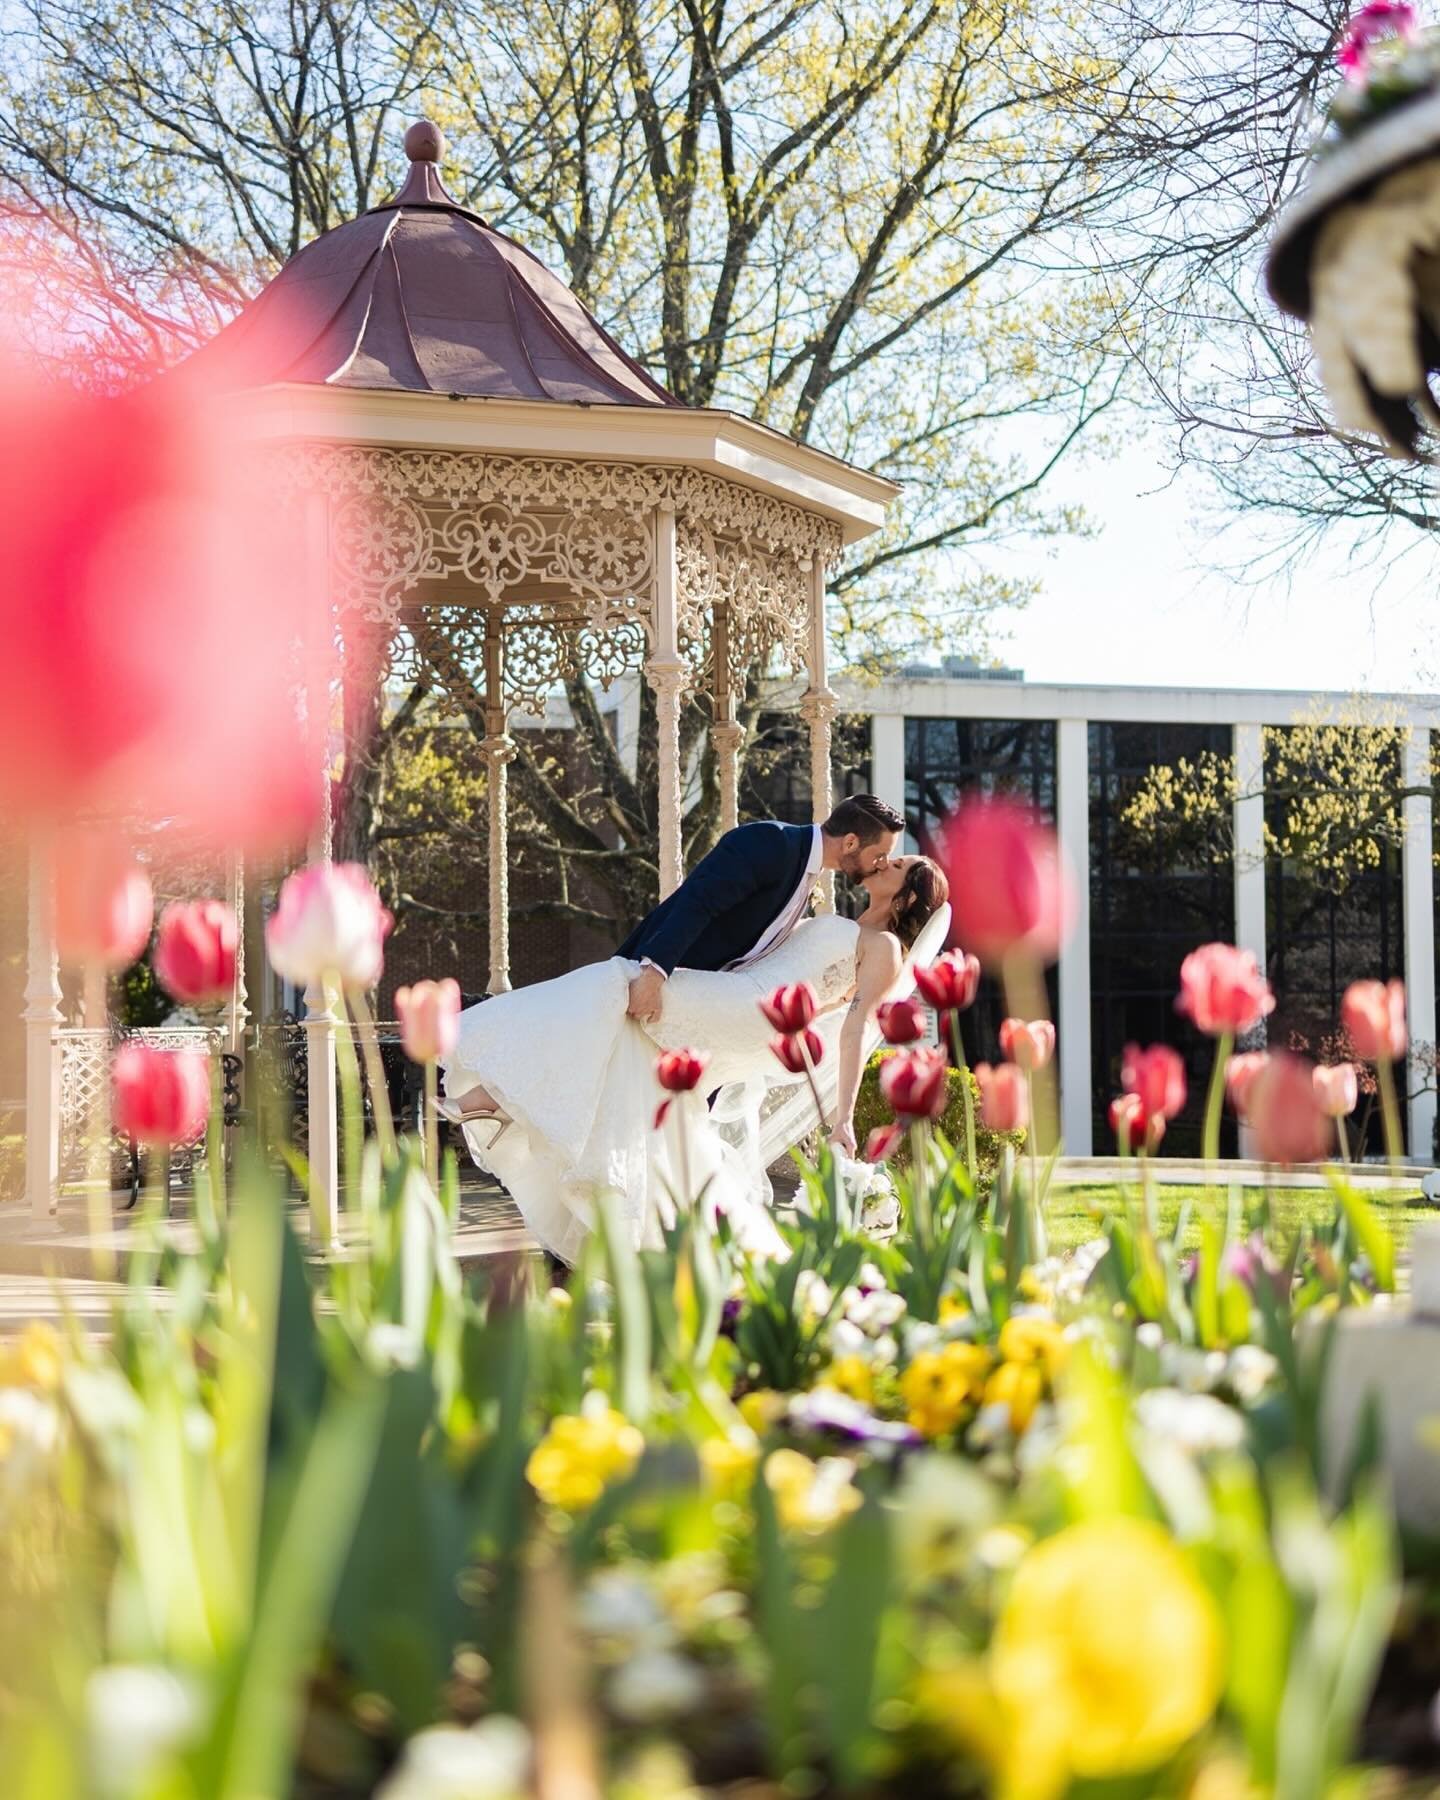 A beautiful Nashville wedding at the historic Belmont Mansion. The perfect backdrop for romance! As a photographer in Nashville, we love being able to shoot weddings at places like this and with couples like these , who&rsquo;s love is just radiating